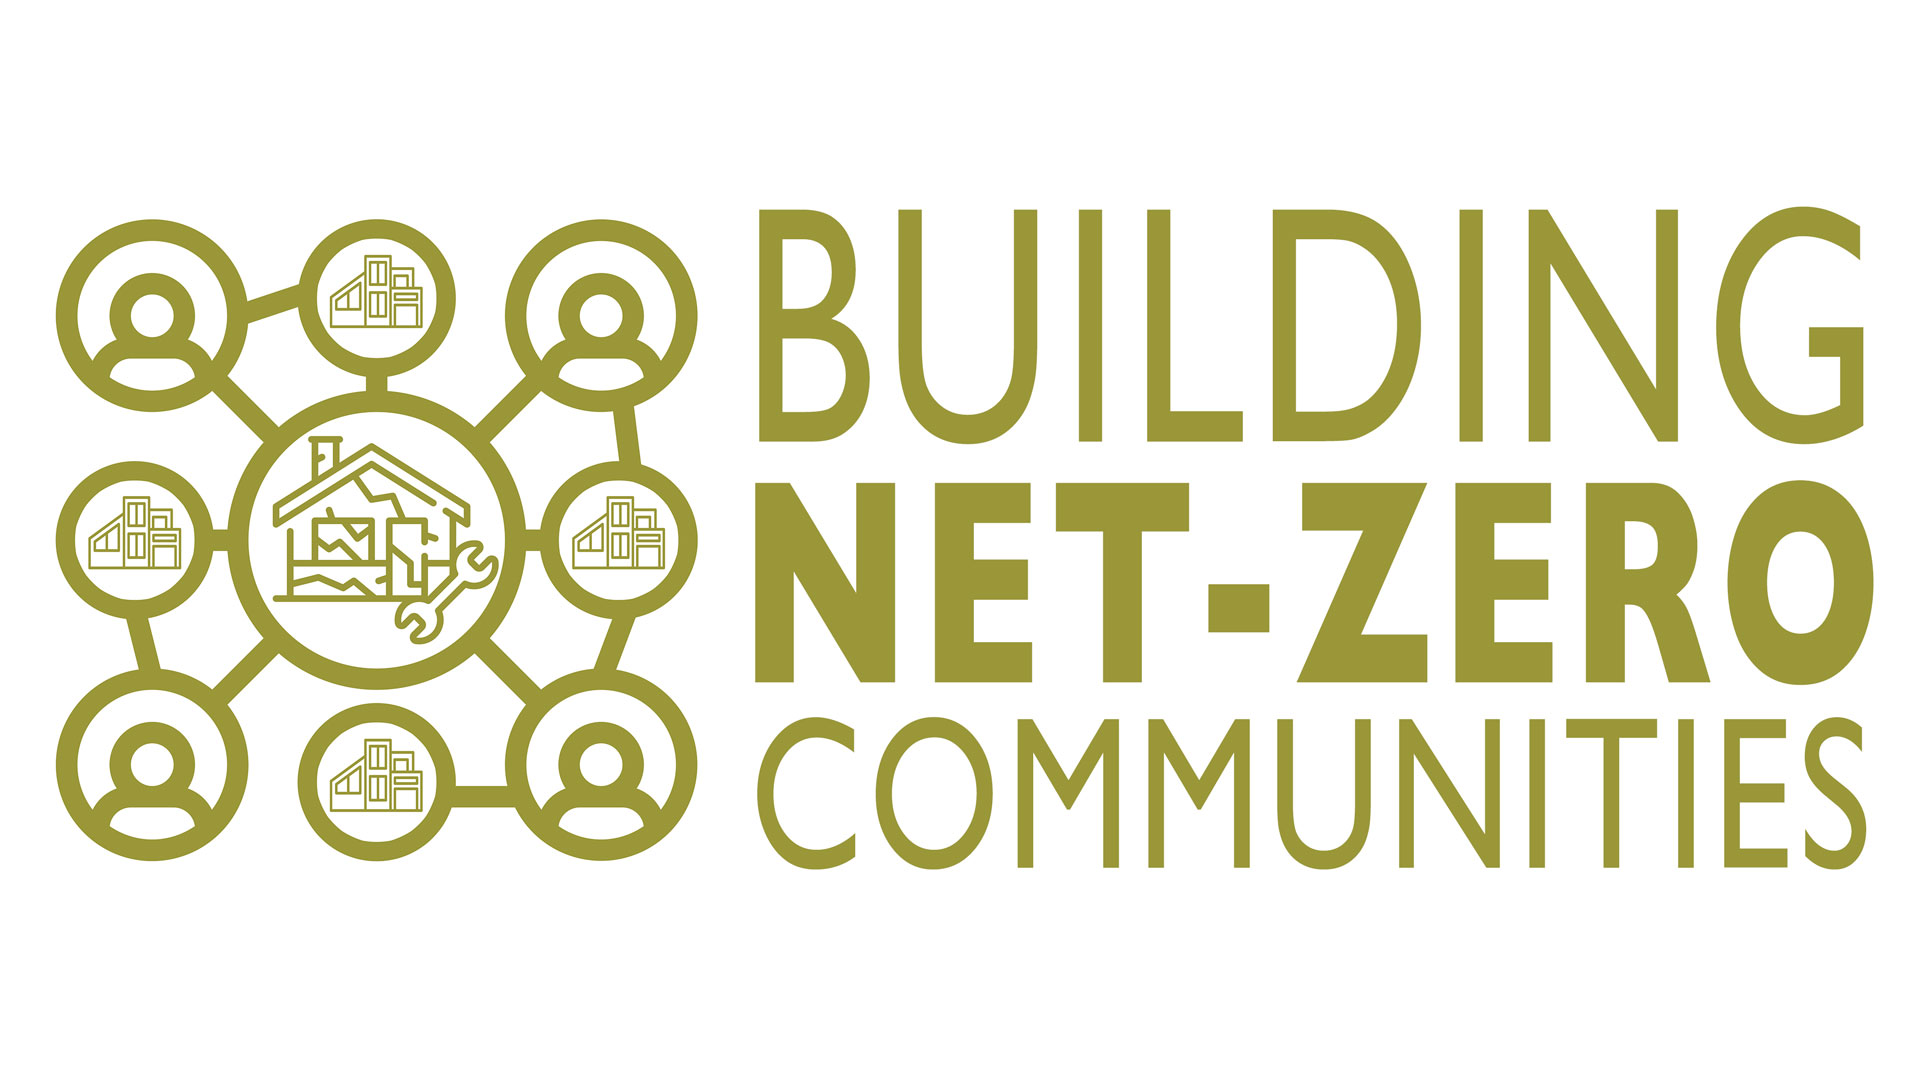 Welcome to our webinar, "Building Net-Zero Communities". This event features a guest presentation from David Somervell, secretary of community led organisation CHOISS - Cohousing In Southern Scotland, and advisor on sustainable architecture.